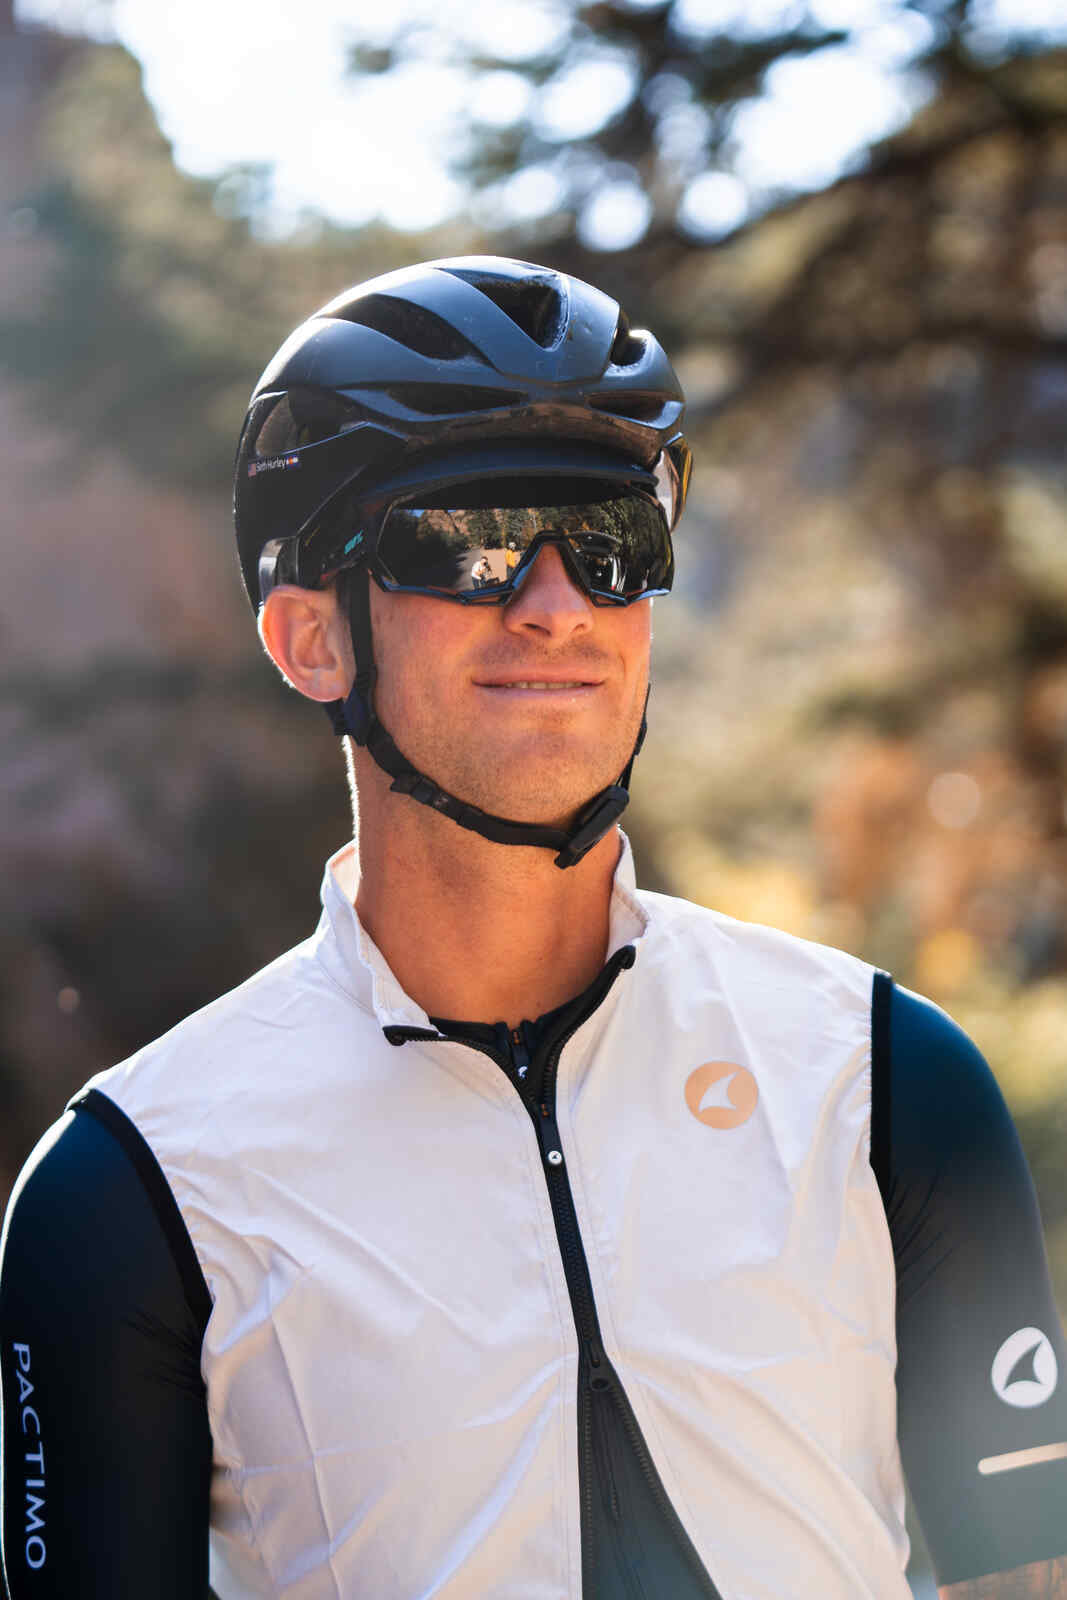 Cyclist in a Men's White Cycling Wind Vest